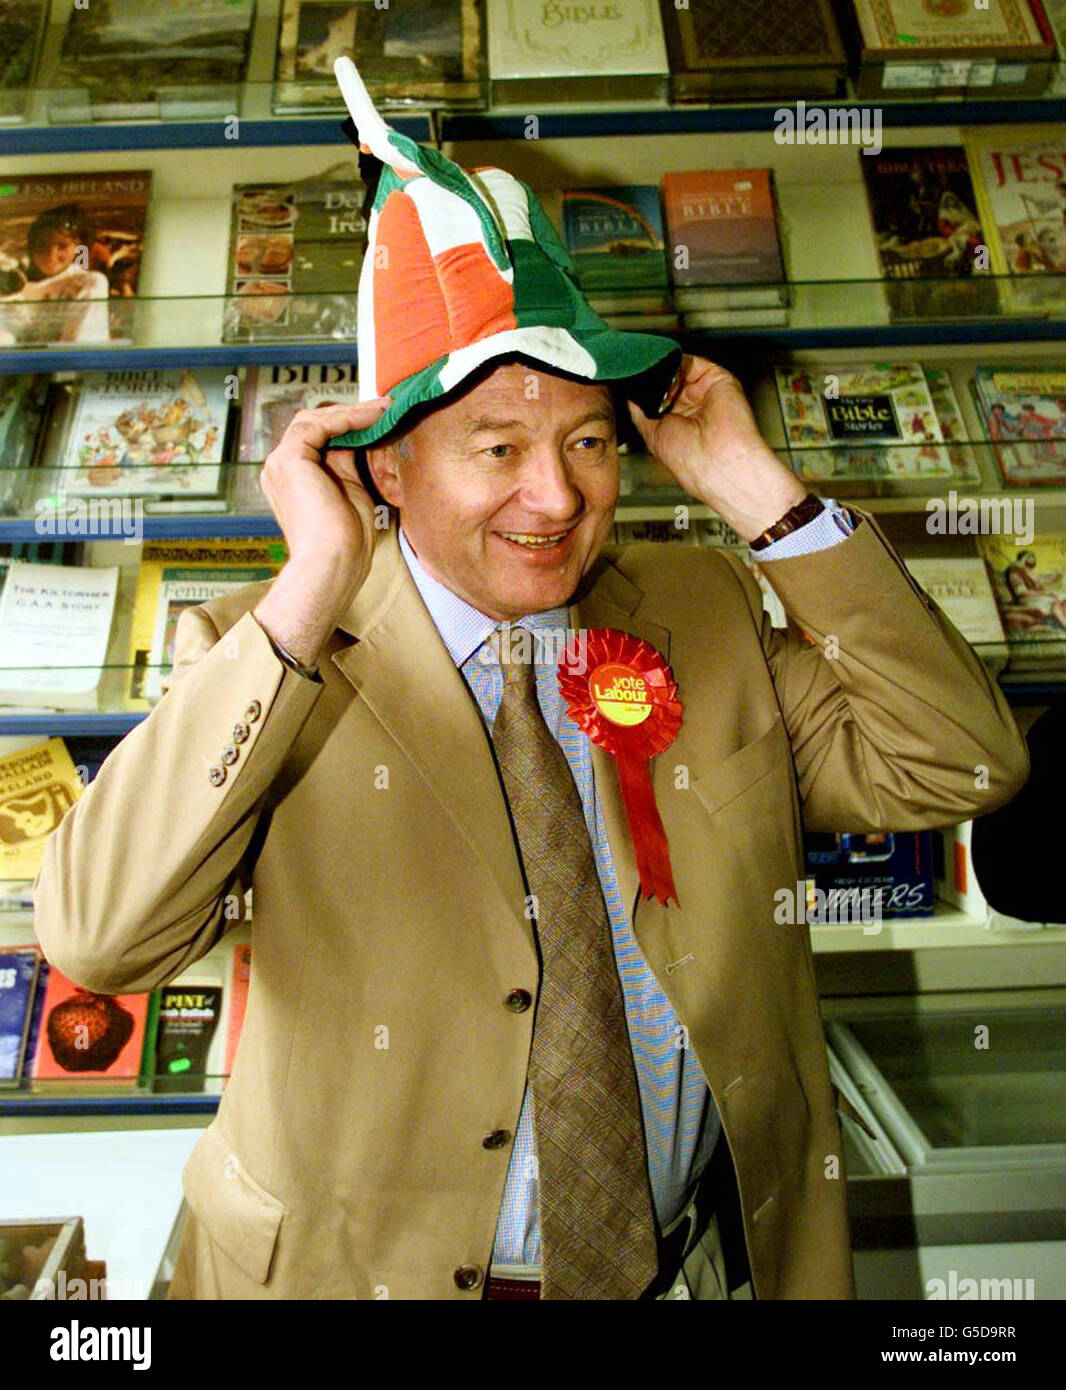 The Mayor of London Ken Livingstone tries on a novelty hat in Wealdstone, London. Livingstone stepped on to the campaign trail in support of Labour candidates despite remaining expelled from the party. The London mayor is canvassing in six marginal seats. * being fought by friends, some of whom have helped behind the scenes to back discussions between Transport Commissioner Bob Kiley and the Government over the Tube. Stock Photo